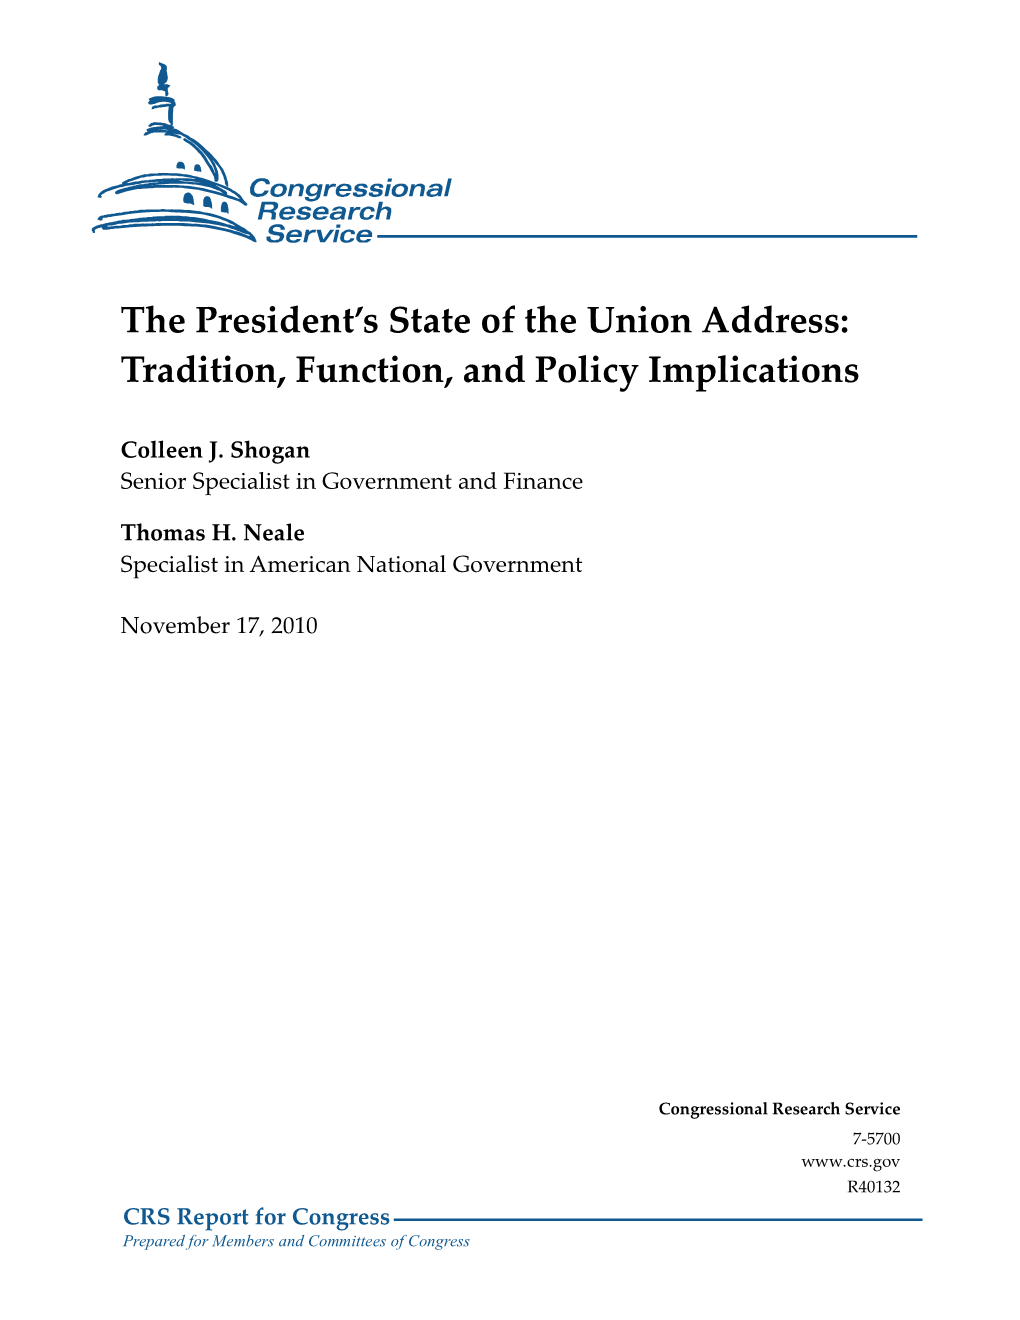 The President's State of the Union Address: Tradition, Function, and Policy Implications